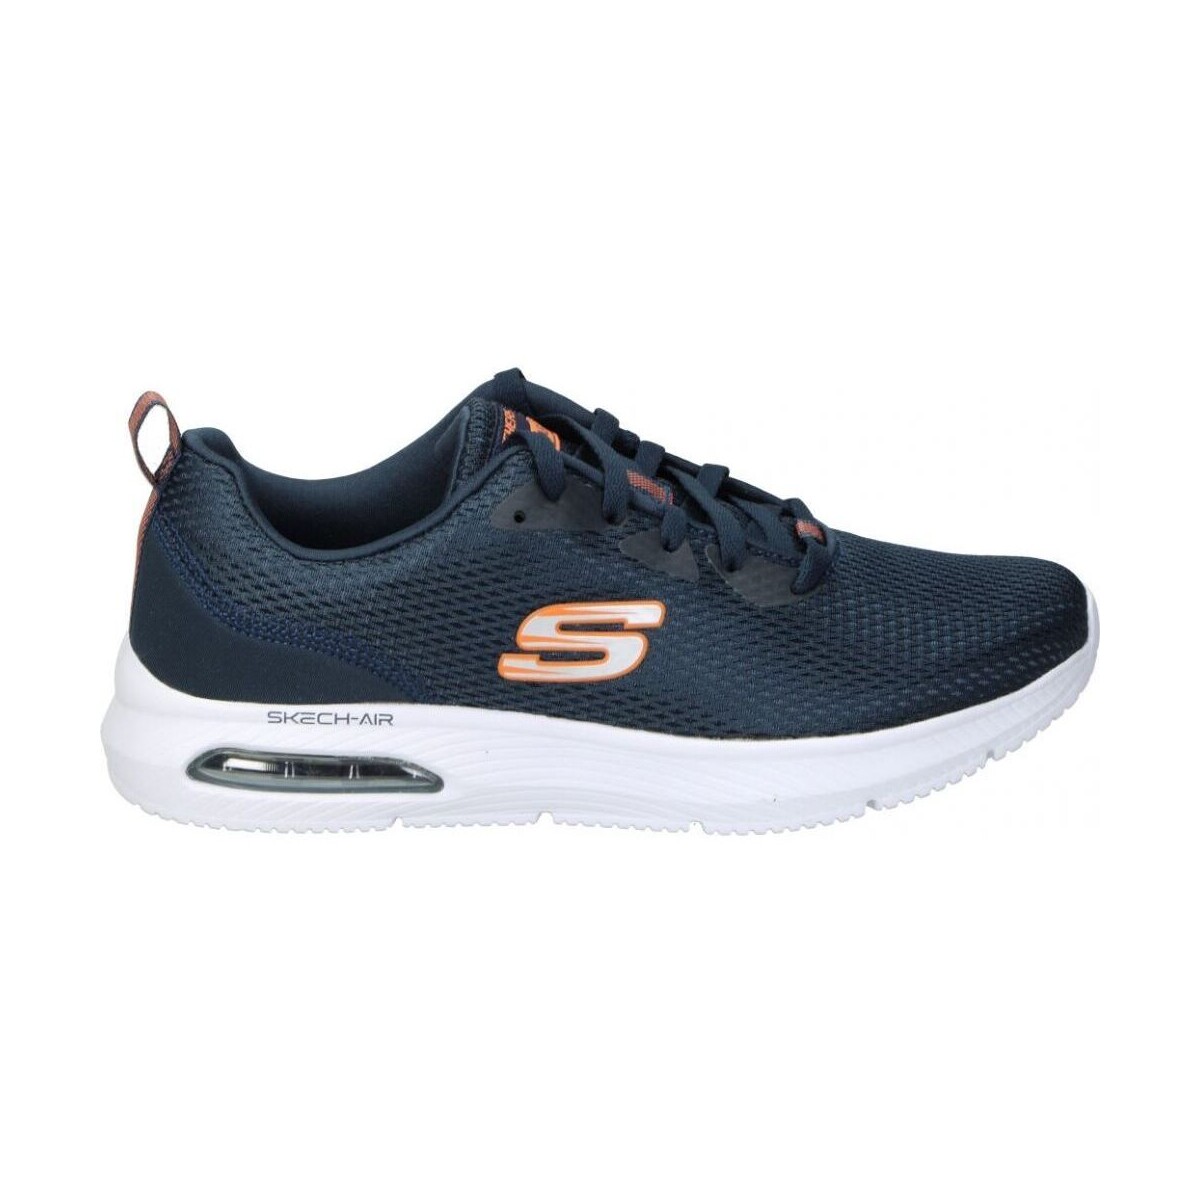 Chaussures Homme Multisport and Skechers 52556-NVY Bleu